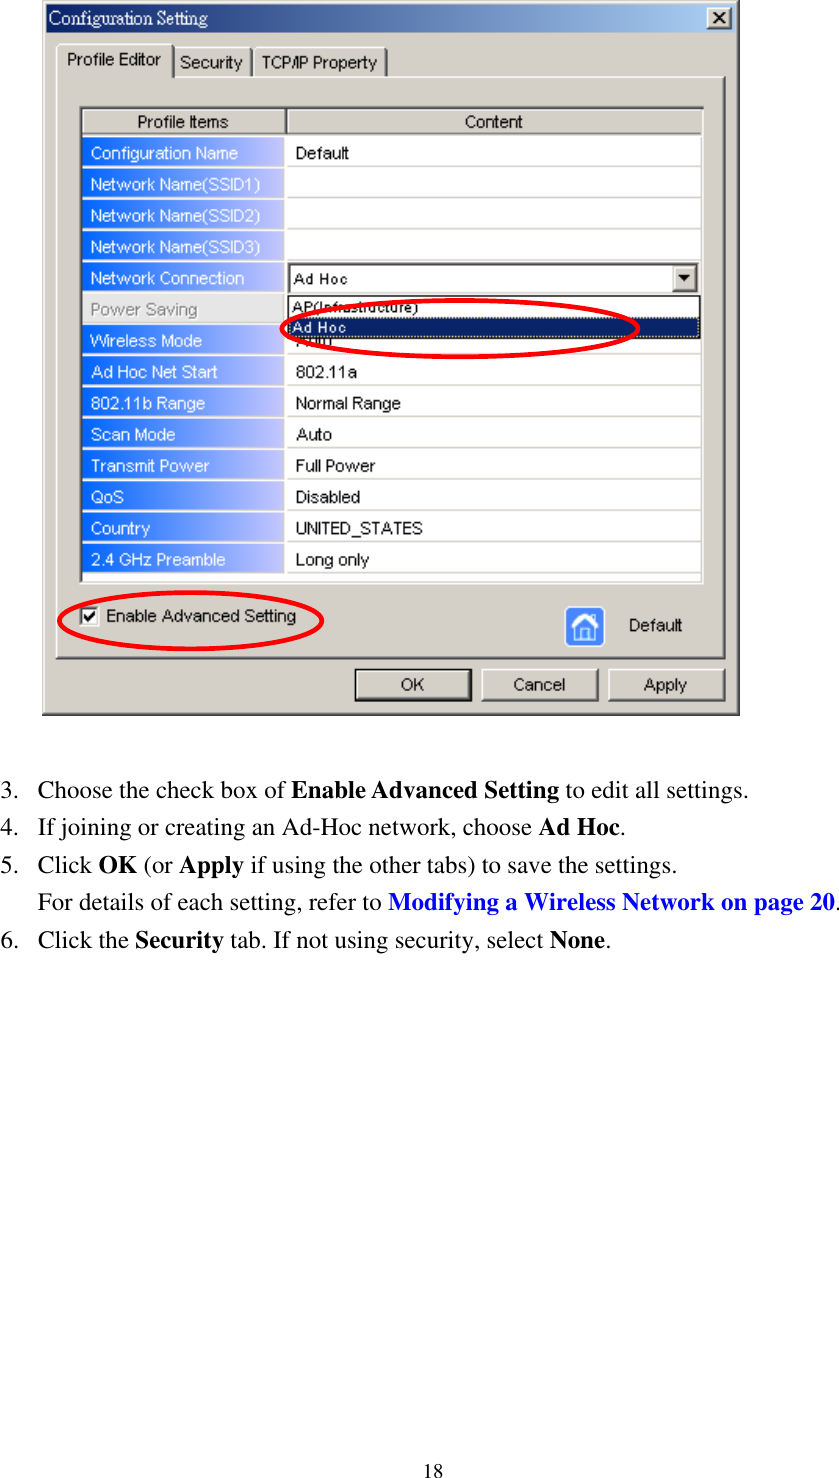  18  3. Choose the check box of Enable Advanced Setting to edit all settings.   4. If joining or creating an Ad-Hoc network, choose Ad Hoc. 5. Click OK (or Apply if using the other tabs) to save the settings. For details of each setting, refer to Modifying a Wireless Network on page 20. 6. Click the Security tab. If not using security, select None. 